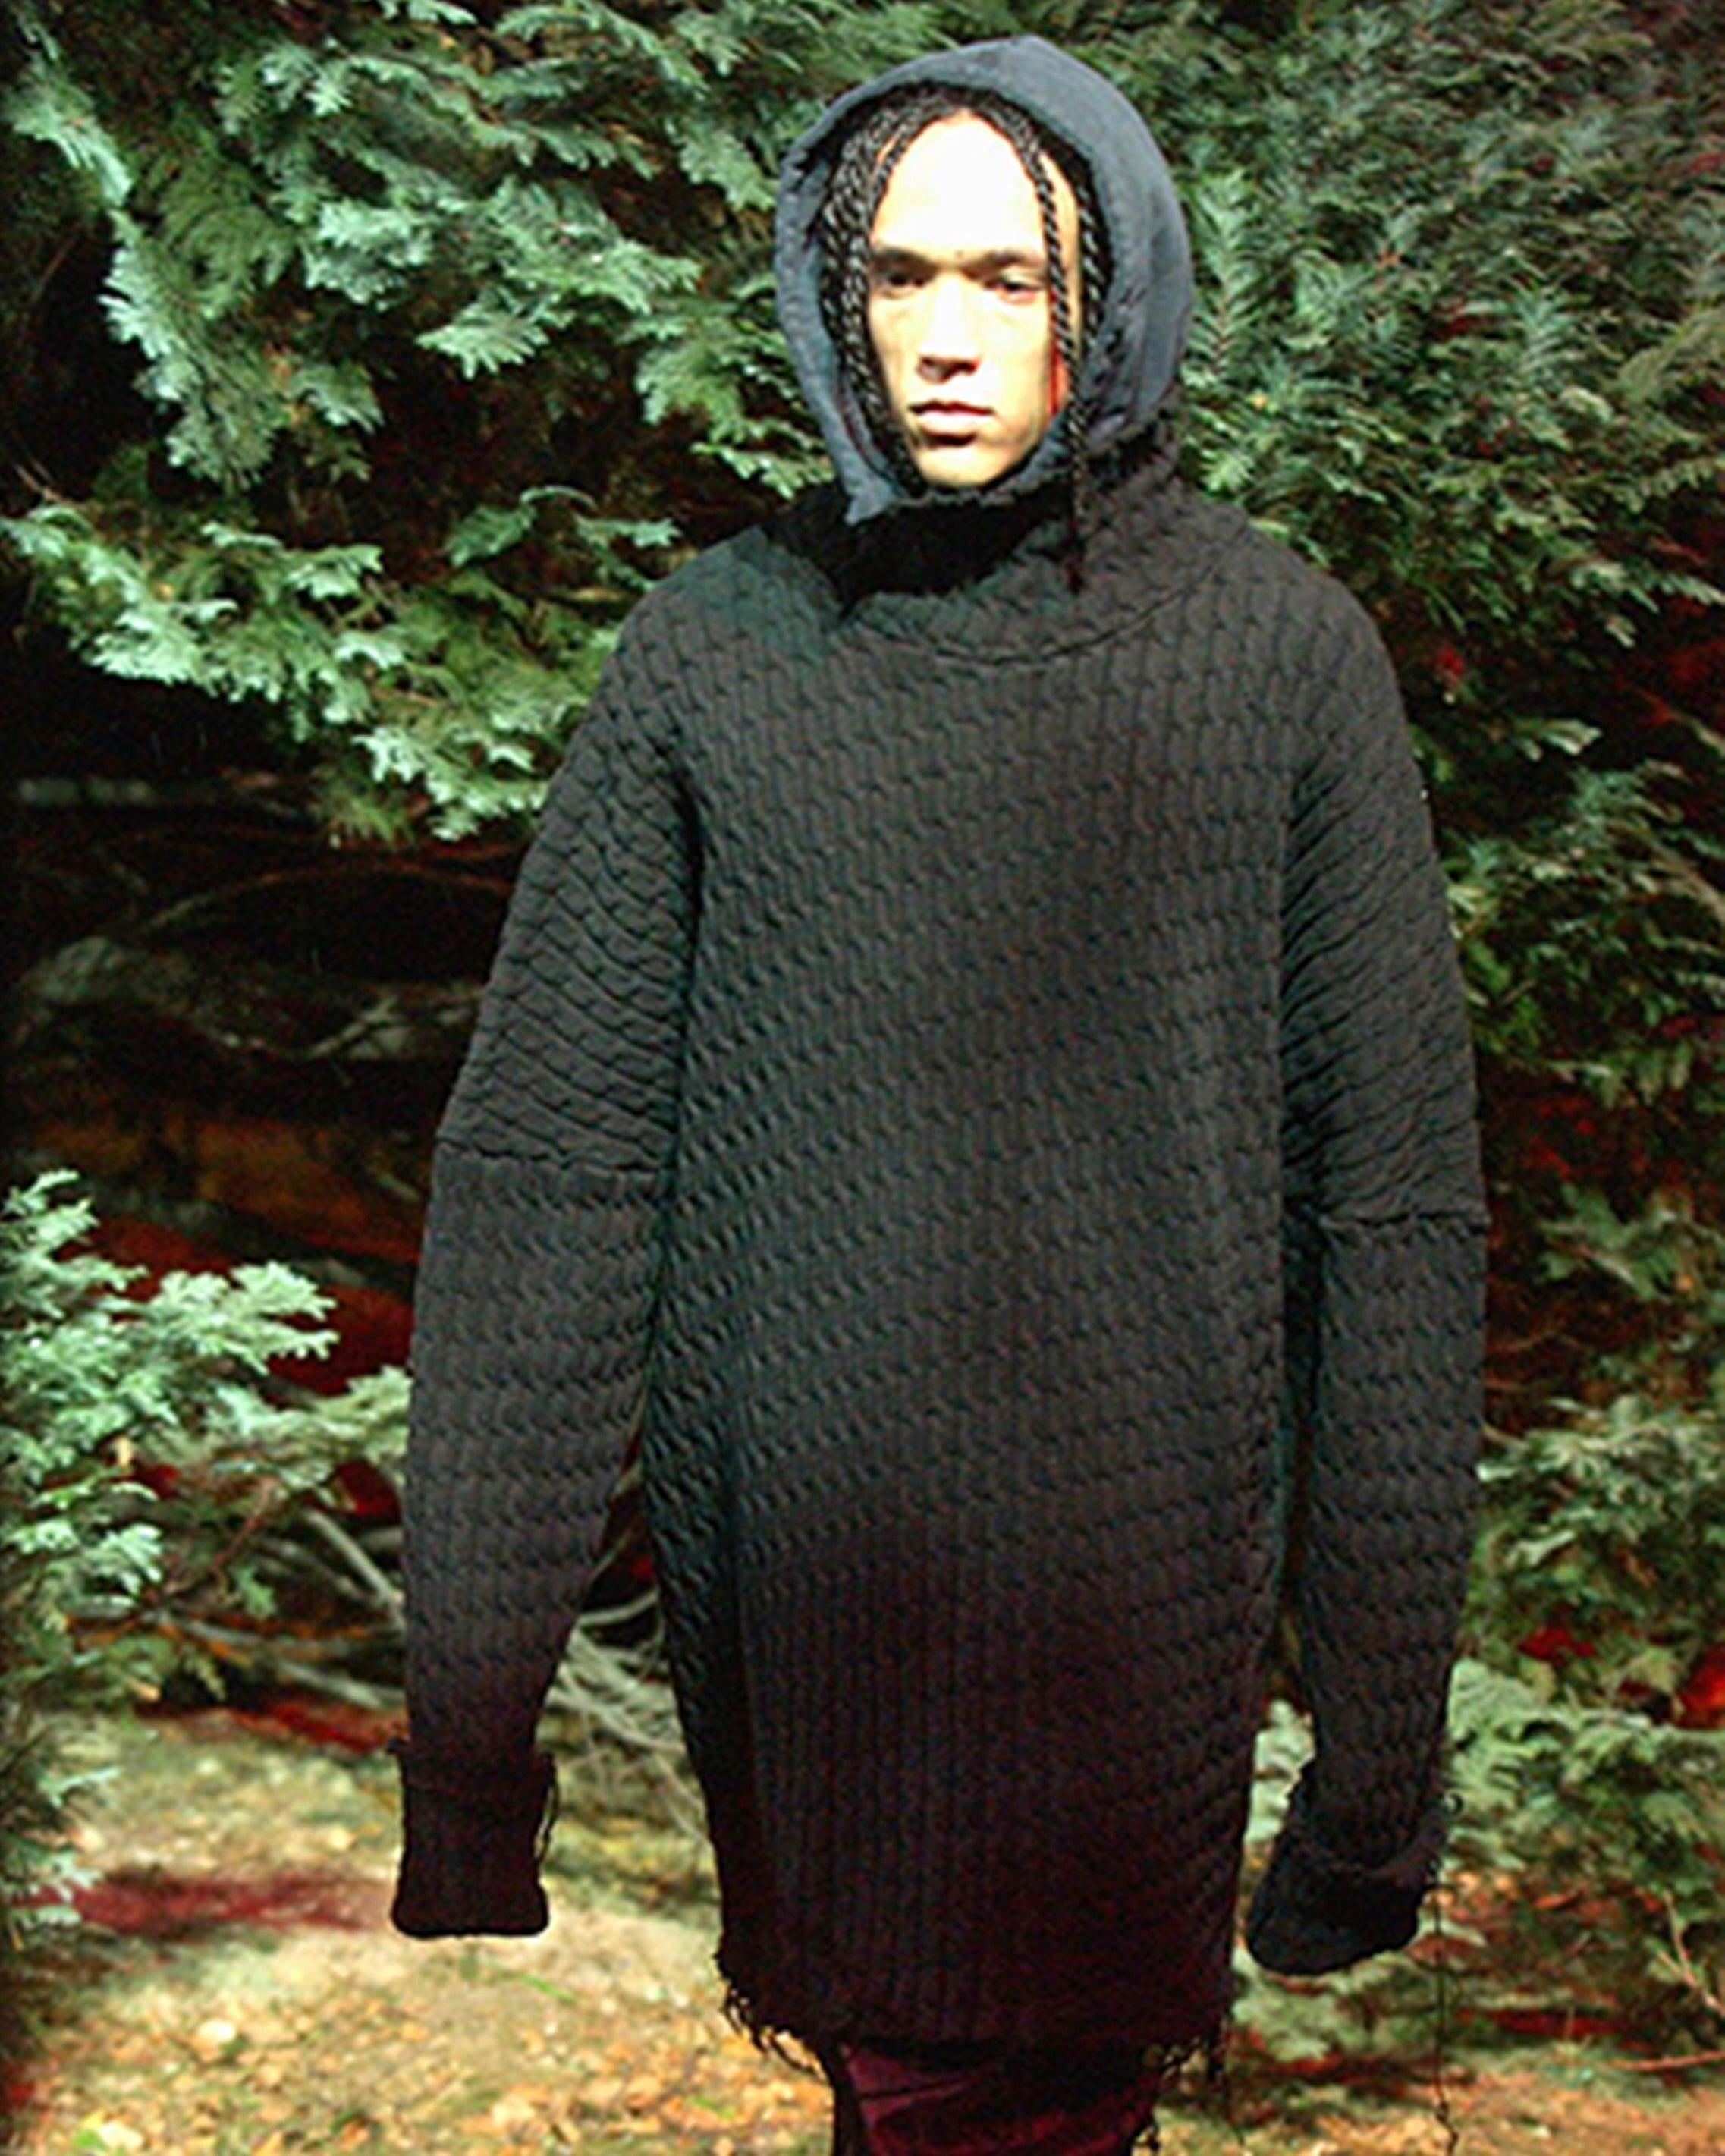 Raf Simons Oversized Cable-Knit Sweater- AW02 “Virginia Creeper